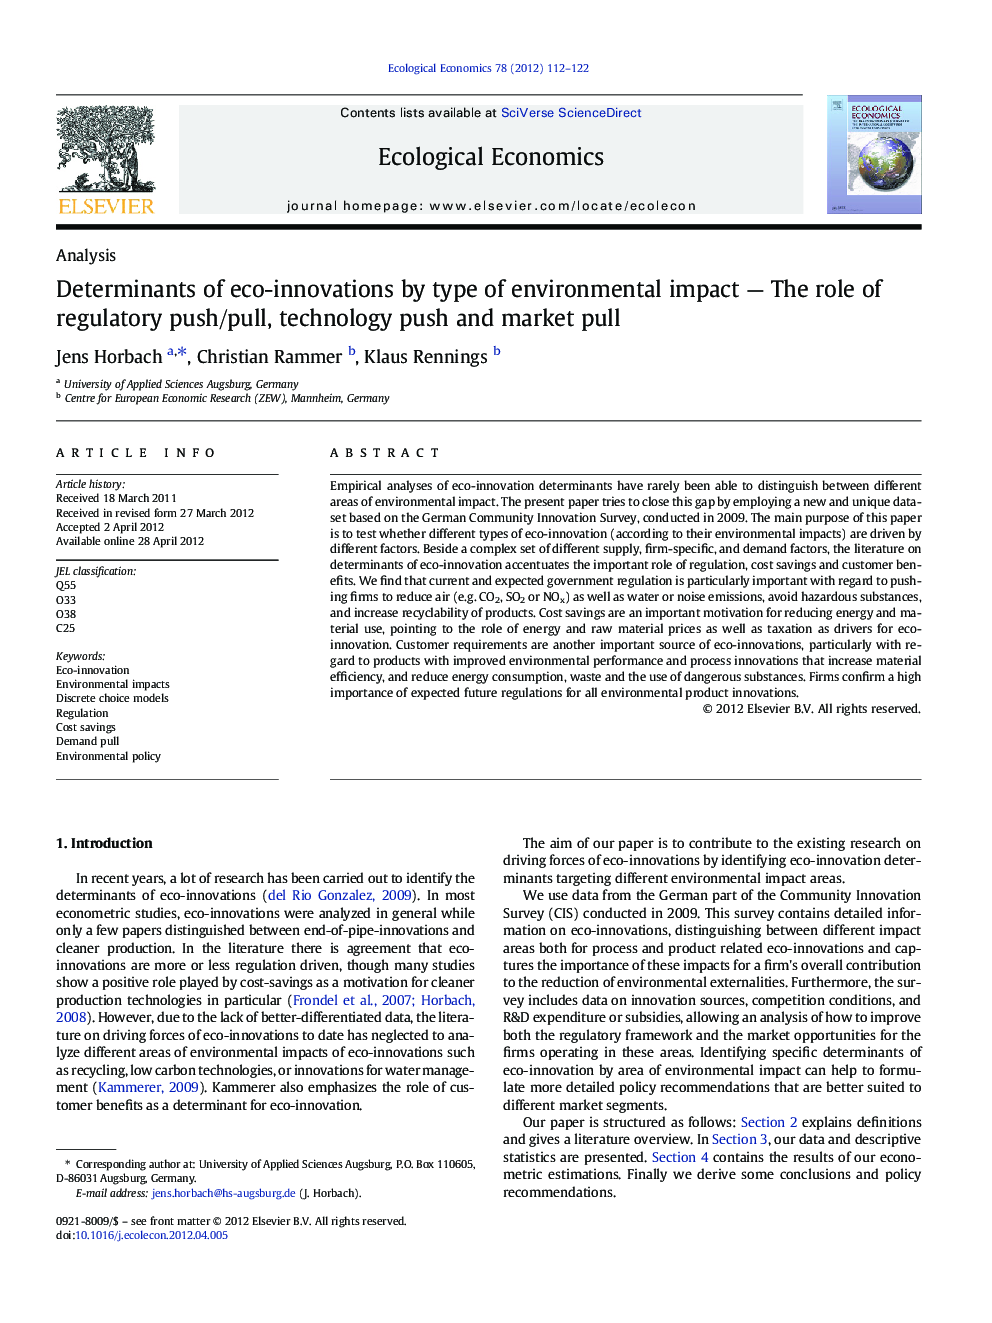 Determinants of eco-innovations by type of environmental impact - The role of regulatory push/pull, technology push and market pull